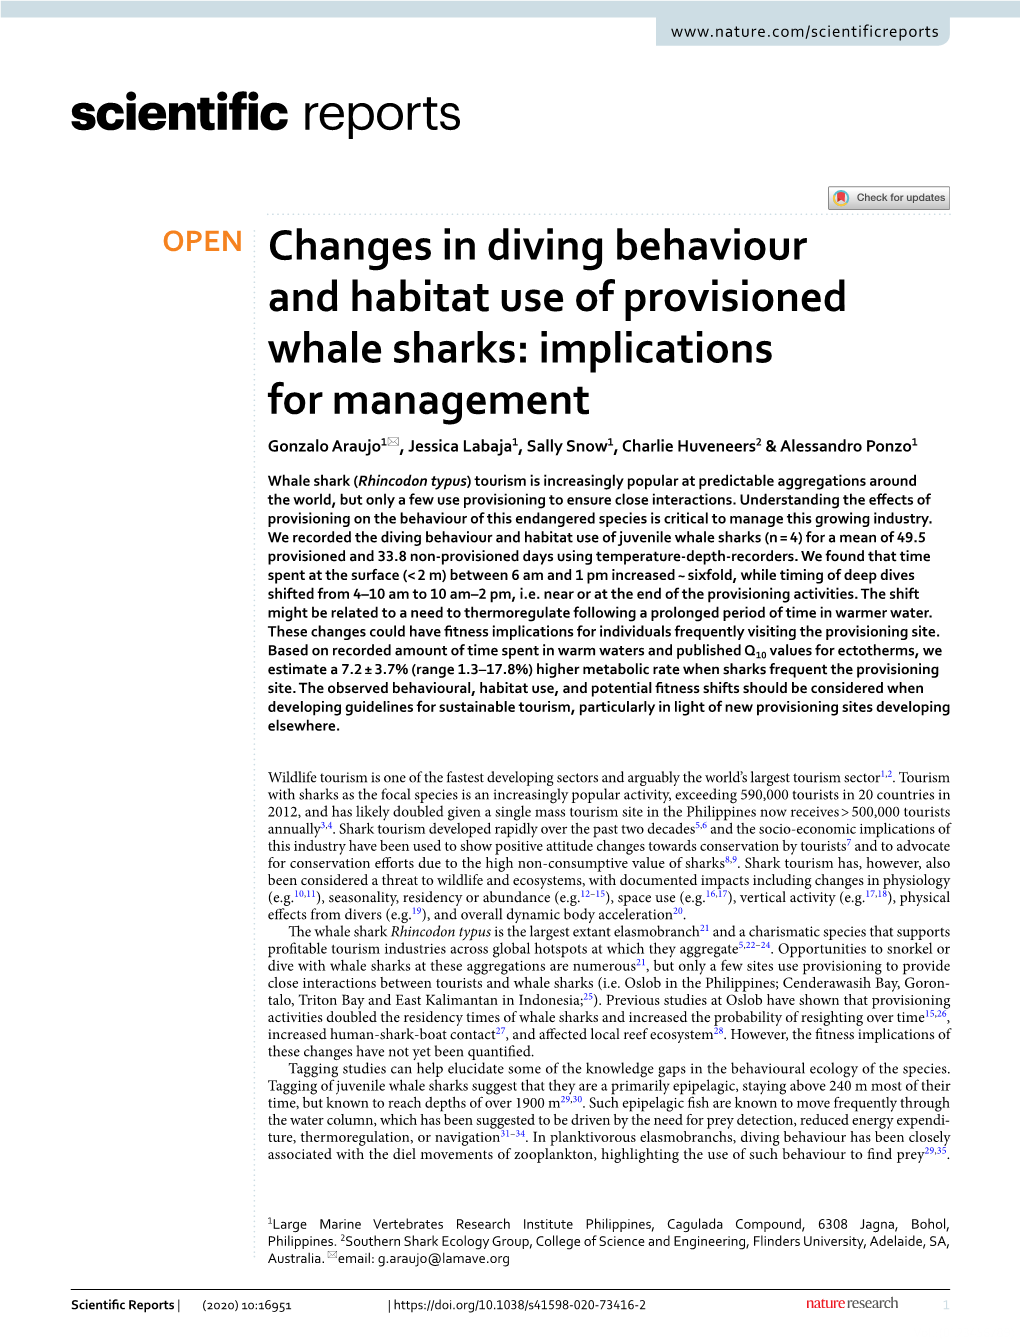 Changes in Diving Behaviour and Habitat Use of Provisioned